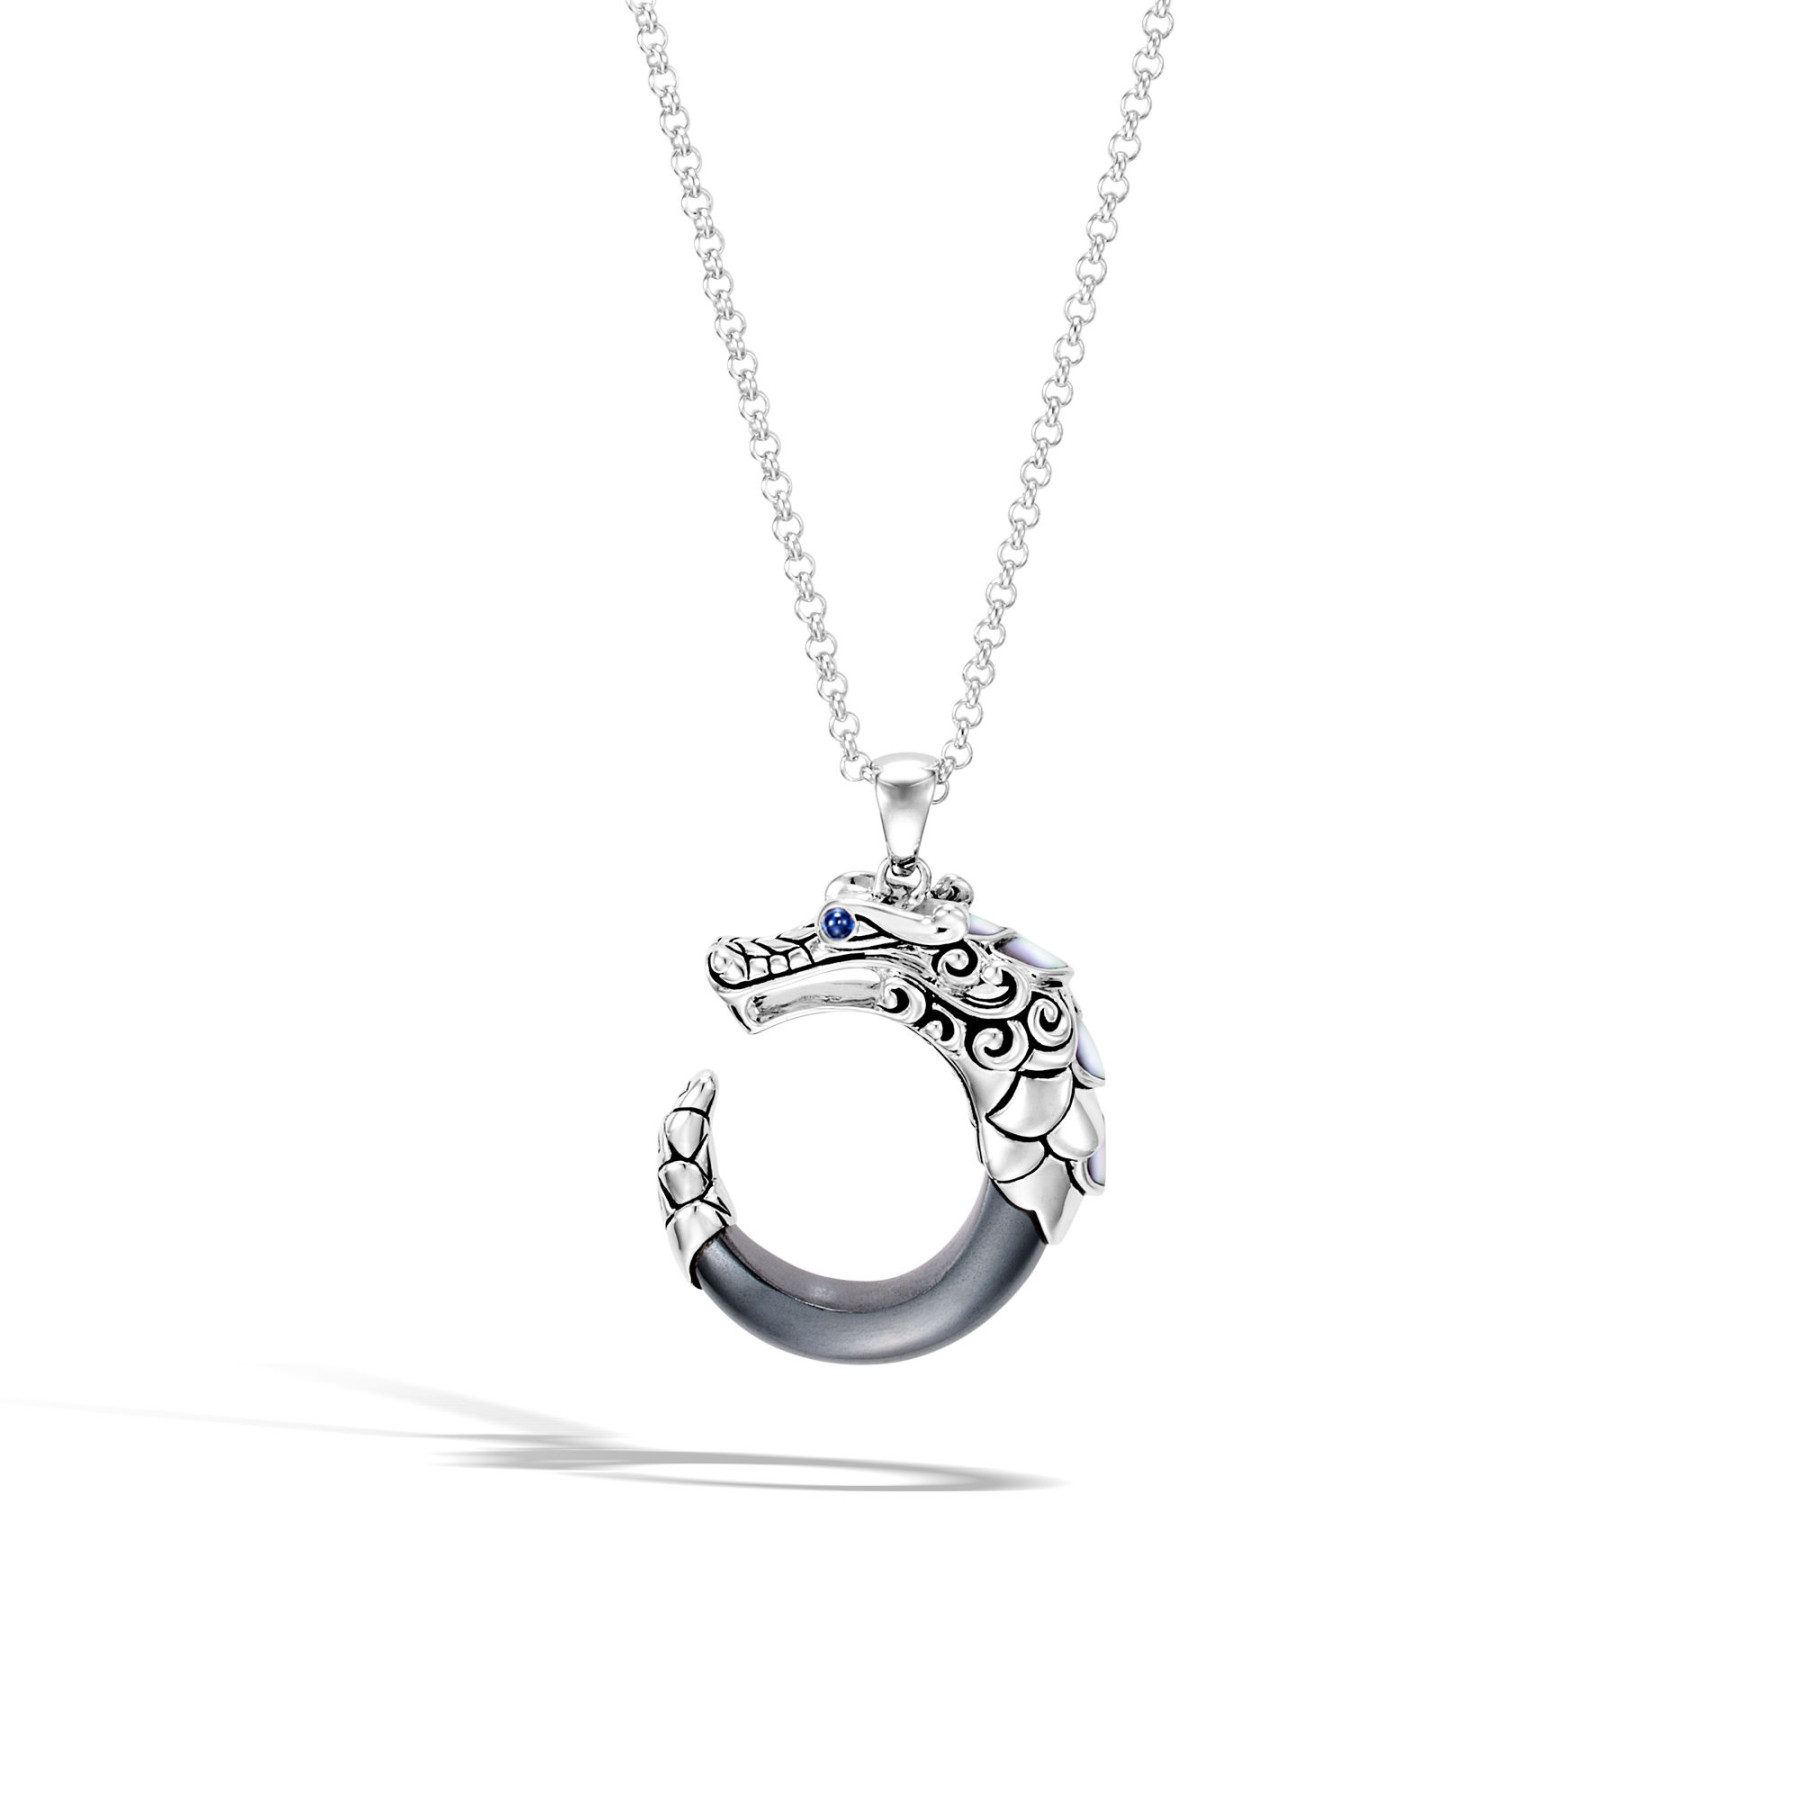 John Hardy Legends Naga Curved Dragon Necklace in Sterling Silver